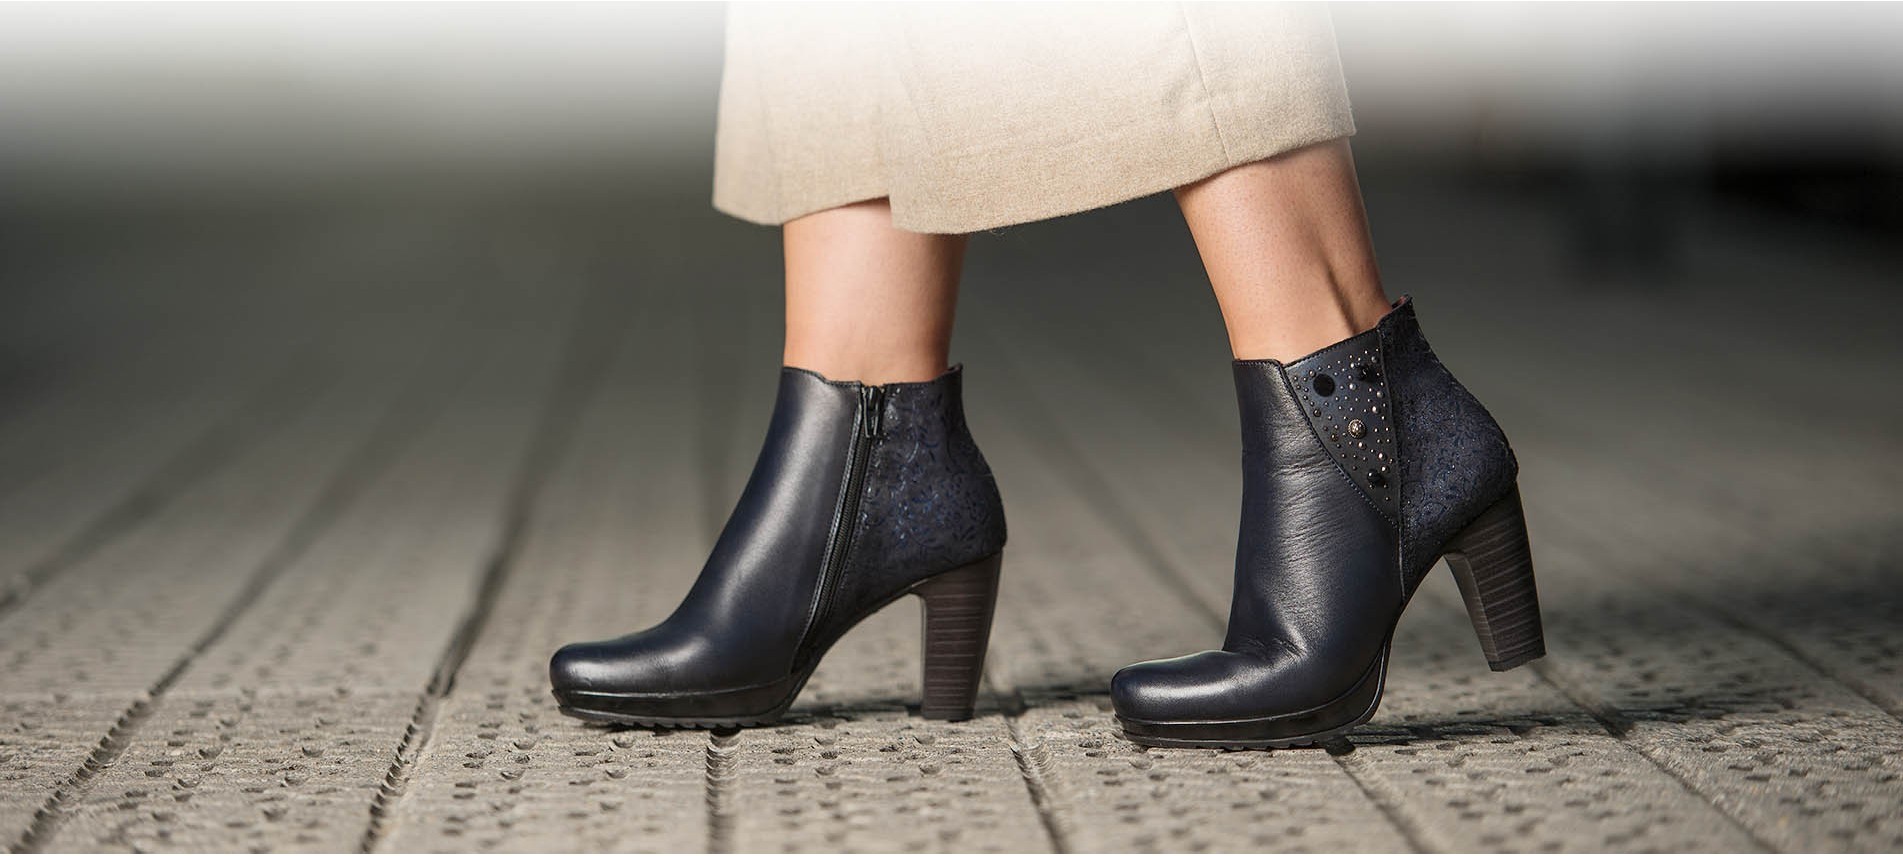 Ankle boots are a wardrobe essential for any